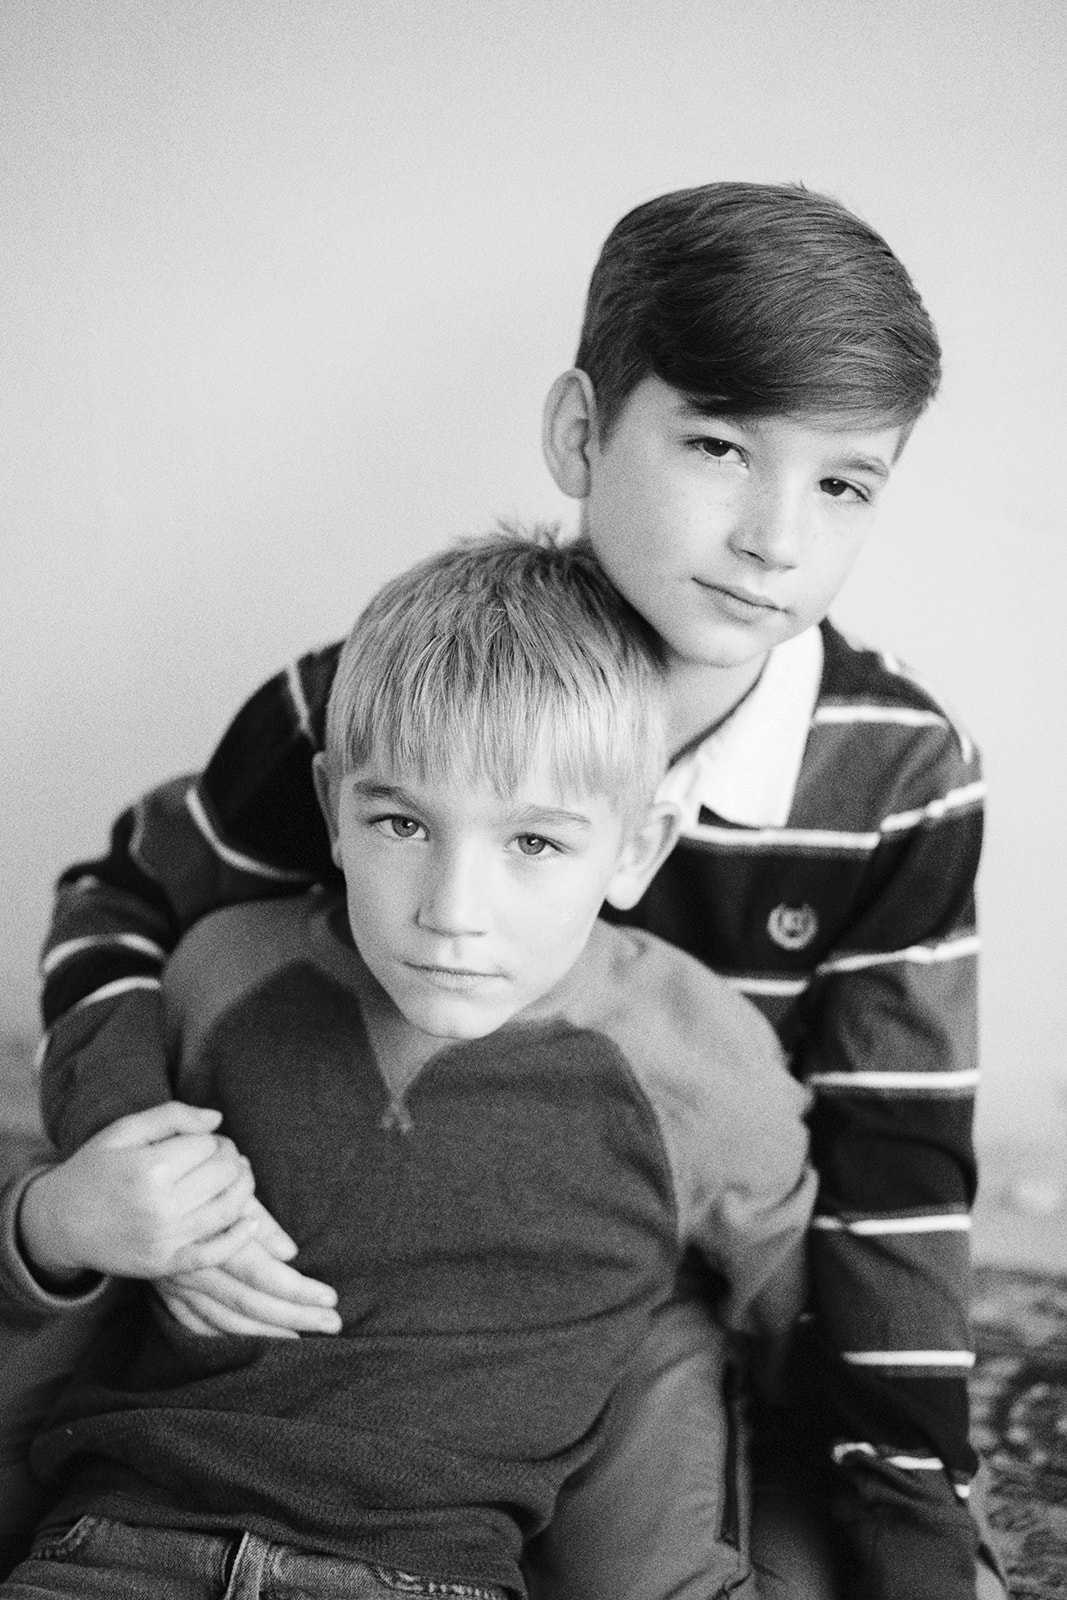 brothers pose for black and white portrait